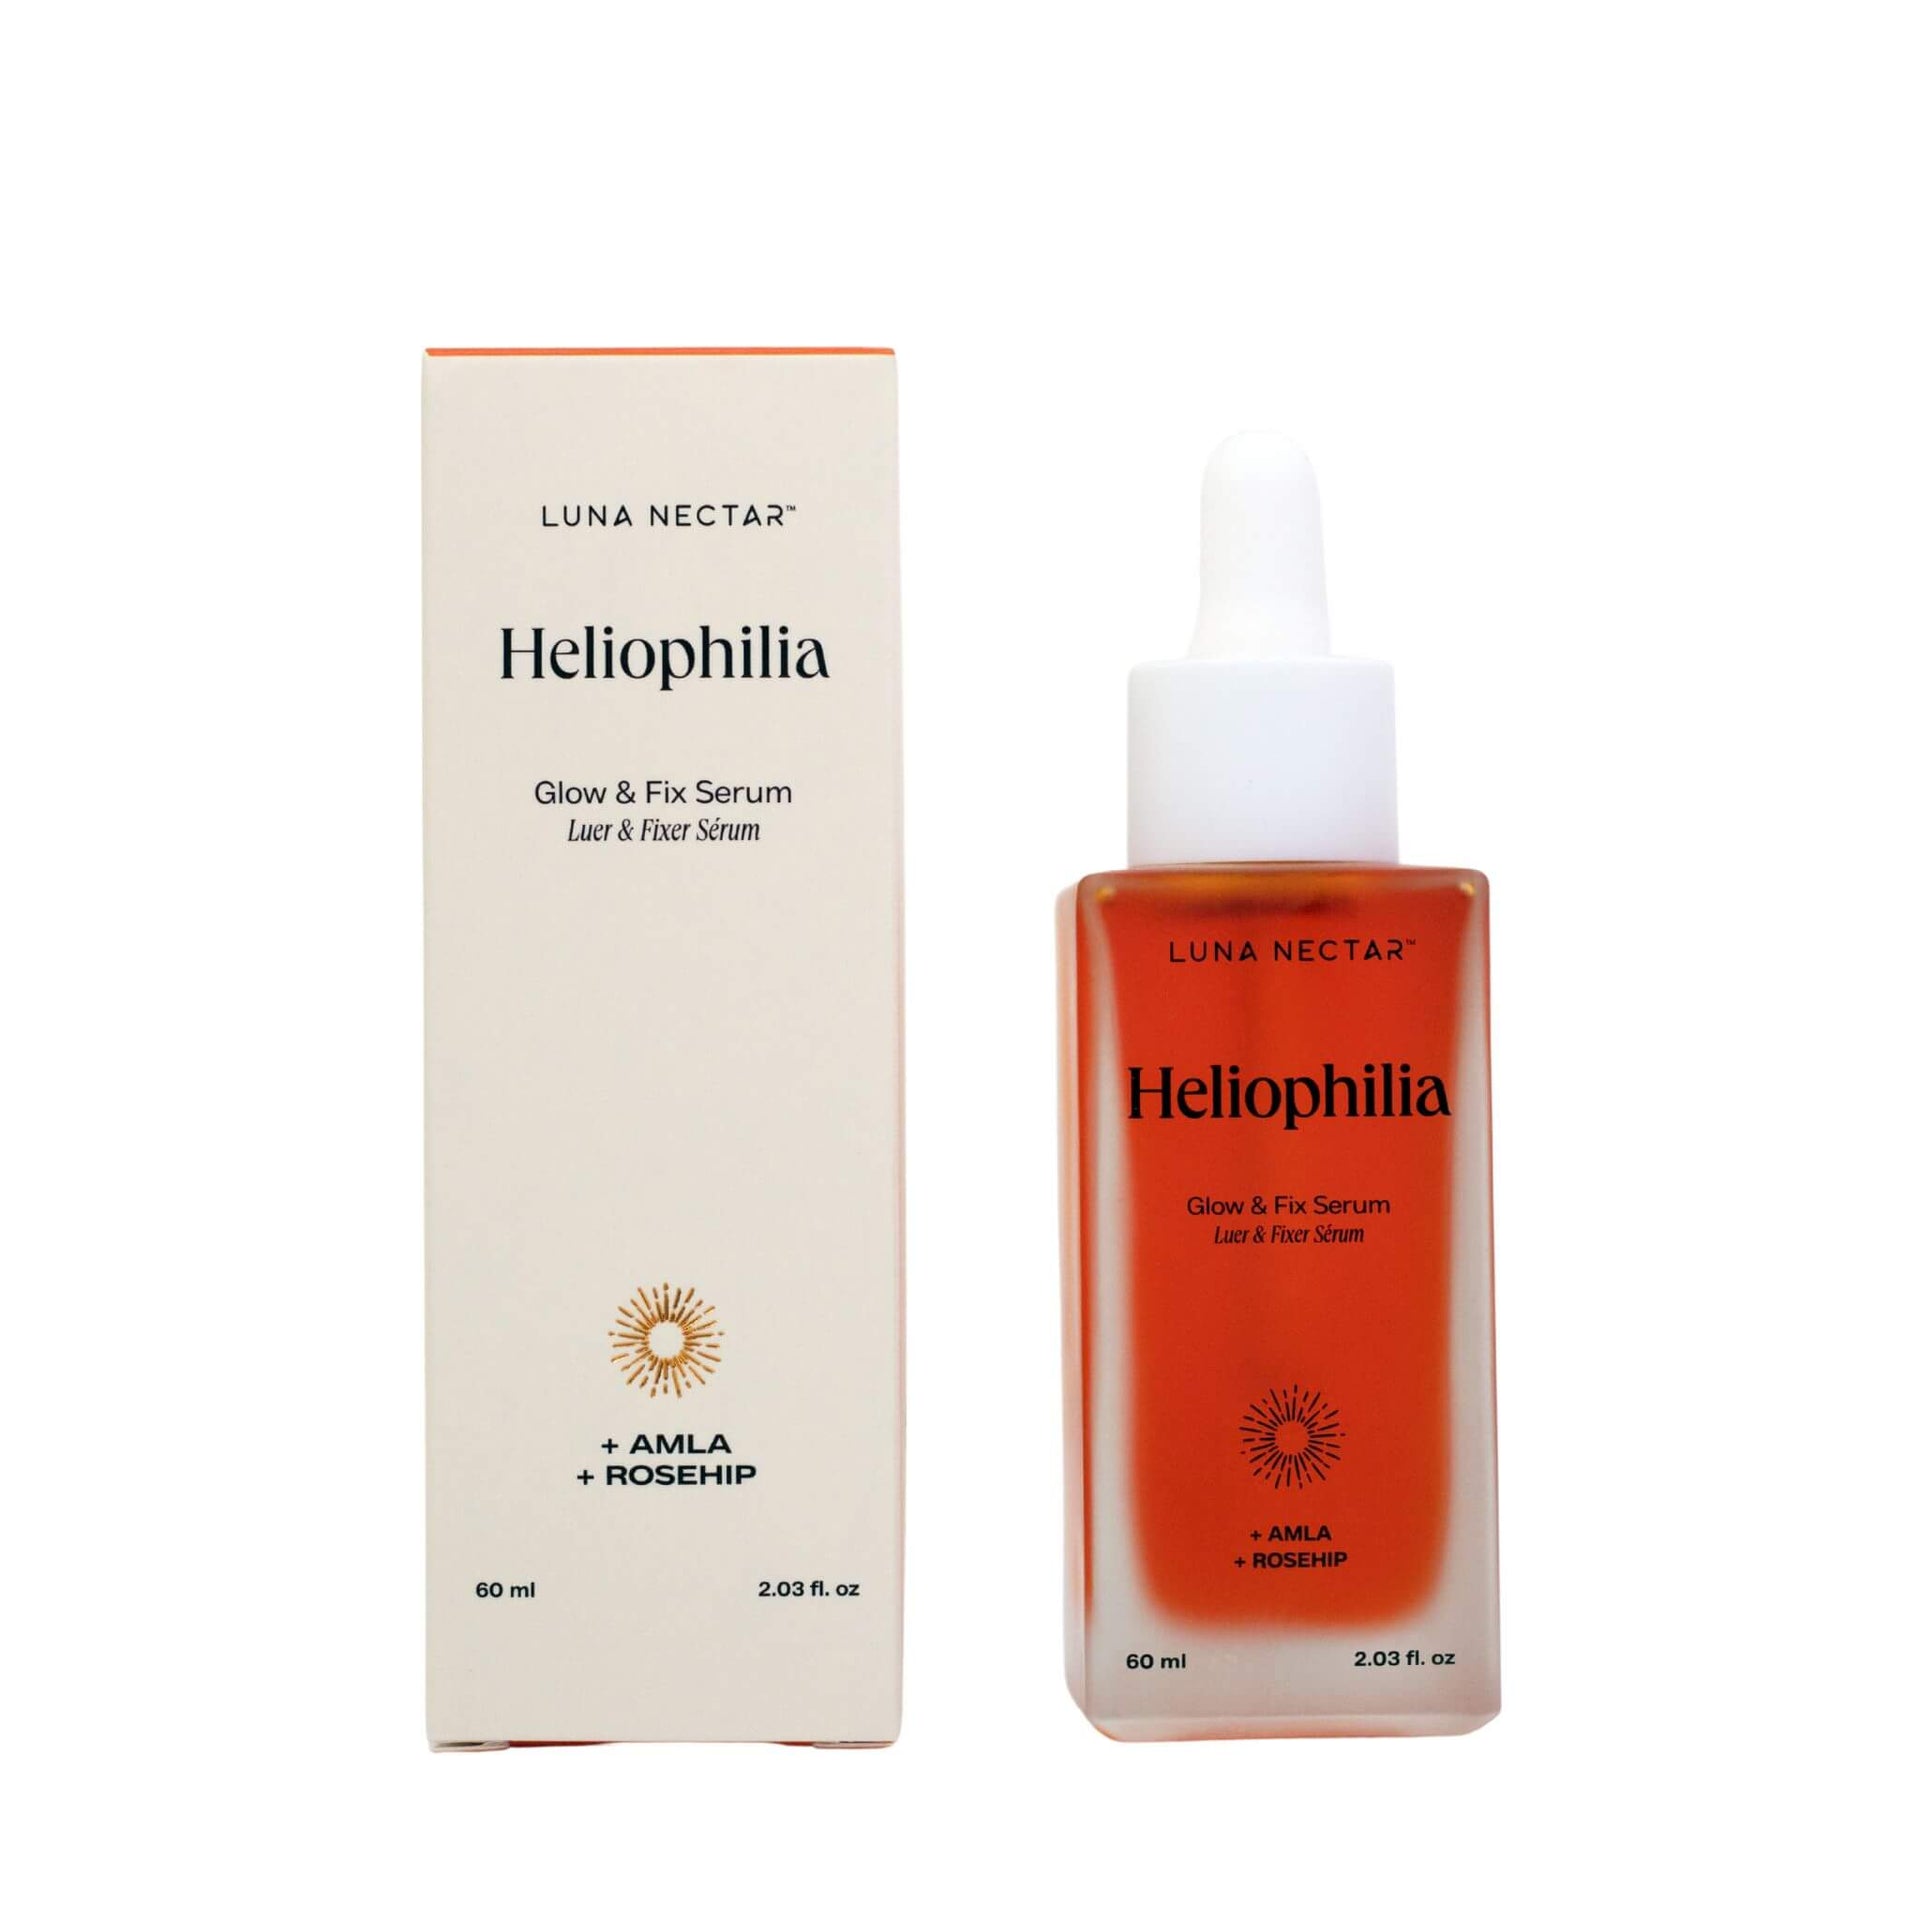 Luna Nectar All | Serum Collection Oil Natural Heliophilia Face